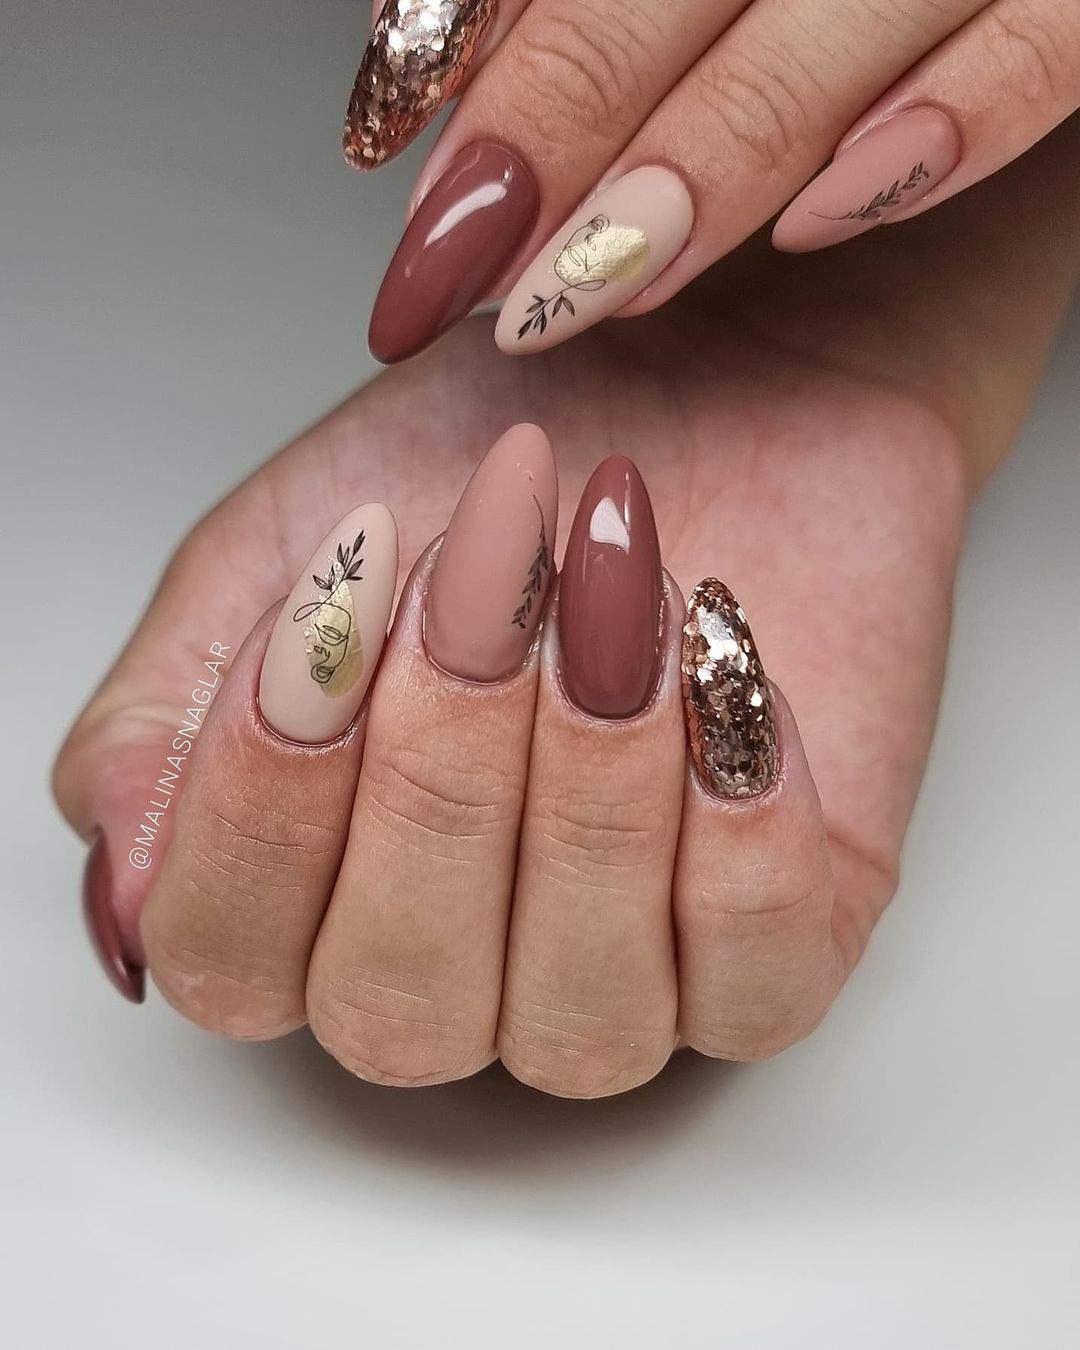 The 100+ Best Nail Designs Trends And Ideas In 2021 images 83